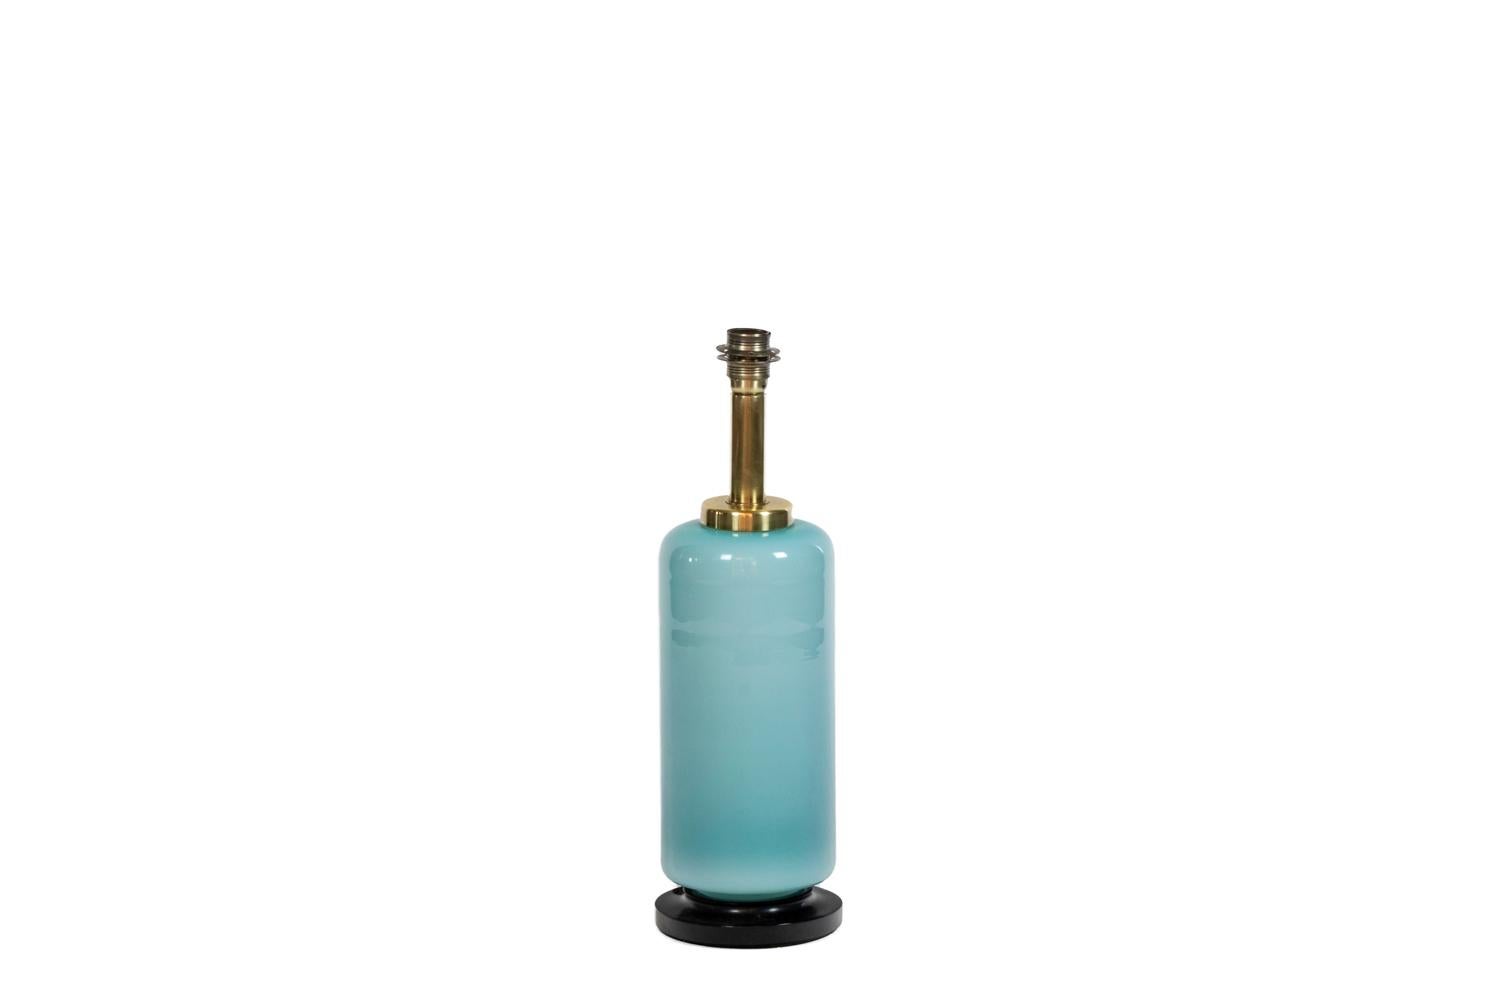 Maison Venini, attributed to. 

Bottle-shaped Murano glass lamp in celadon color.

Italian work realized in the 1960s.

New and functional electrical system.

!The price doesn’t include the lampshade price. However, our workshop can advise